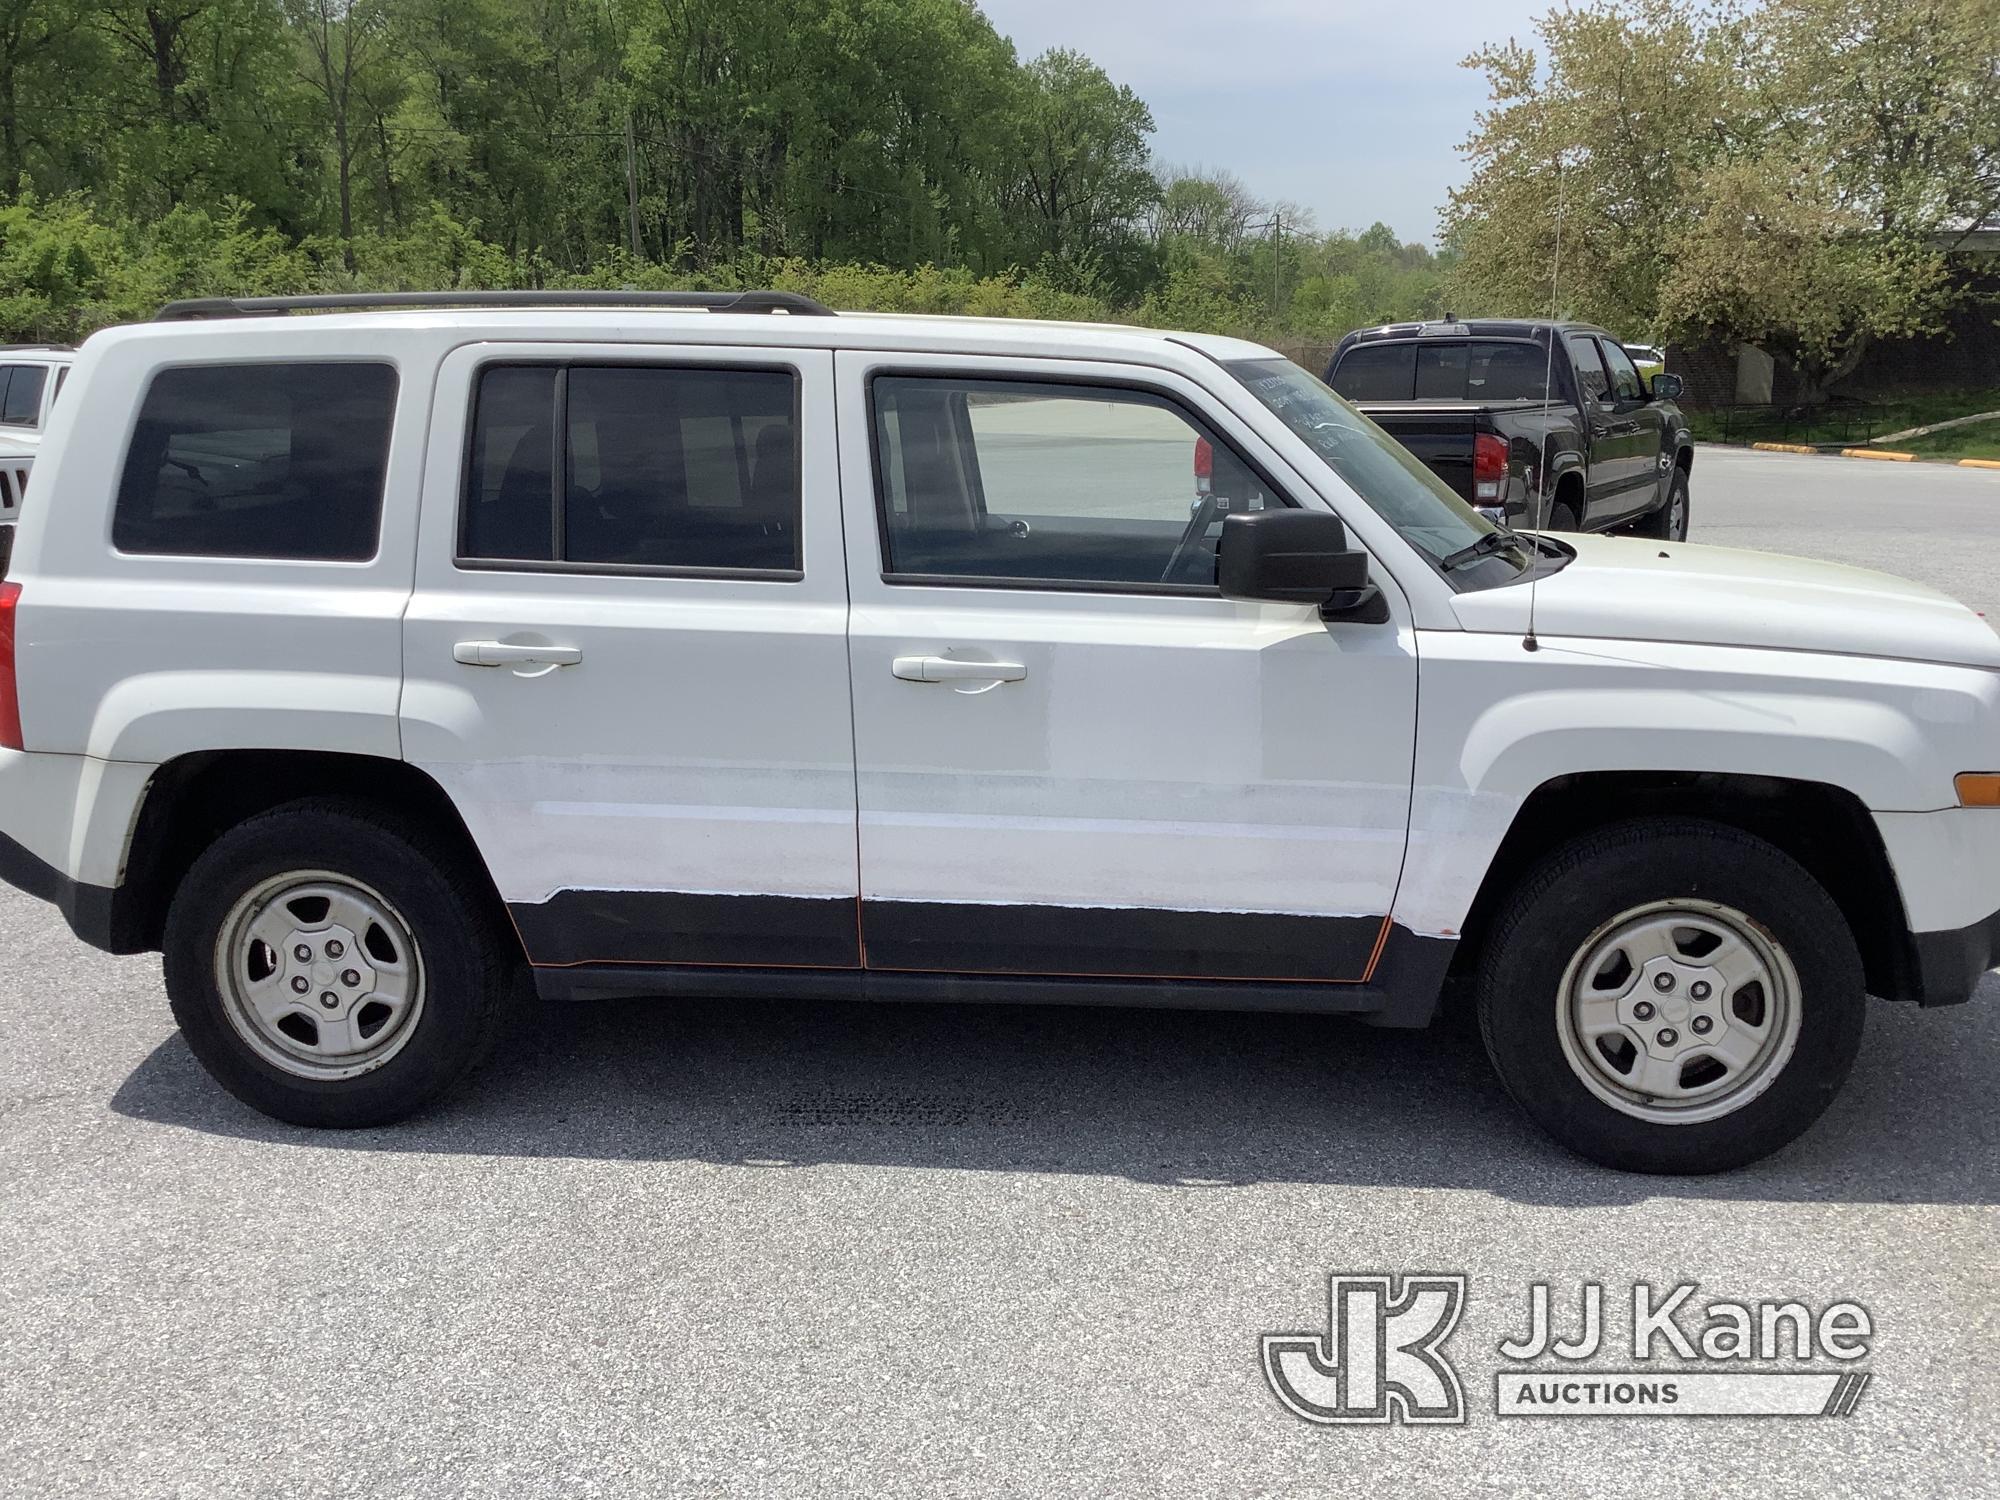 (Chester Springs, PA) 2014 Jeep Patriot 4x4 4-Door Sport Utility Vehicle Runs & Moves, Body & Rust D